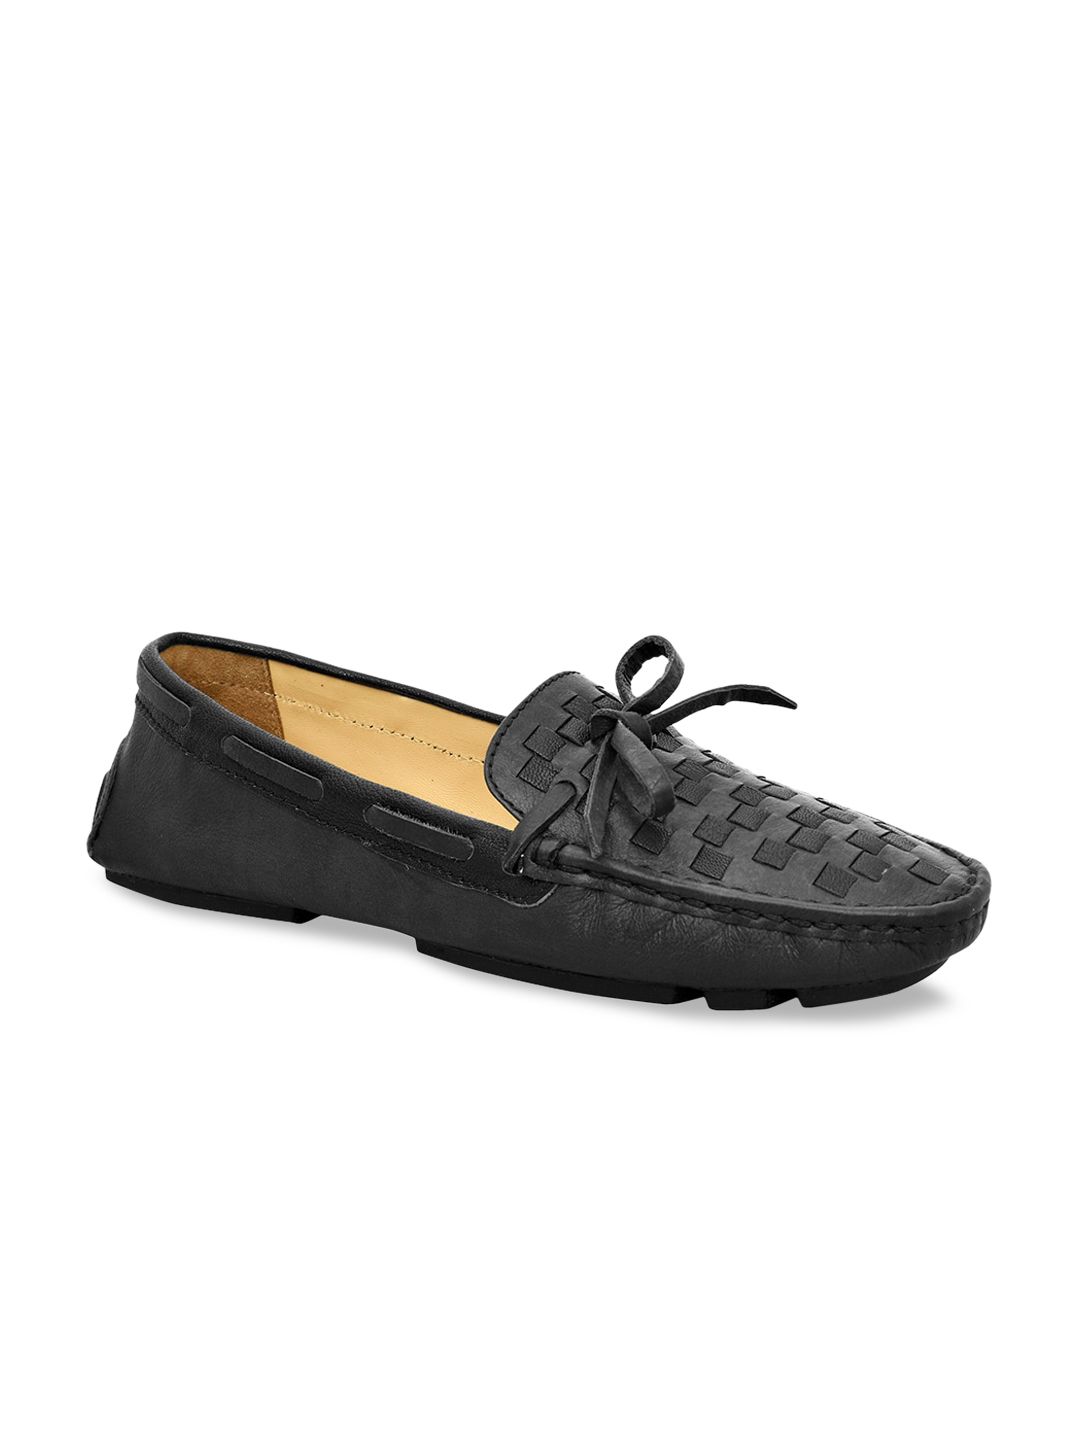 Eske Women Black Textured Leather Boat Shoes Price in India